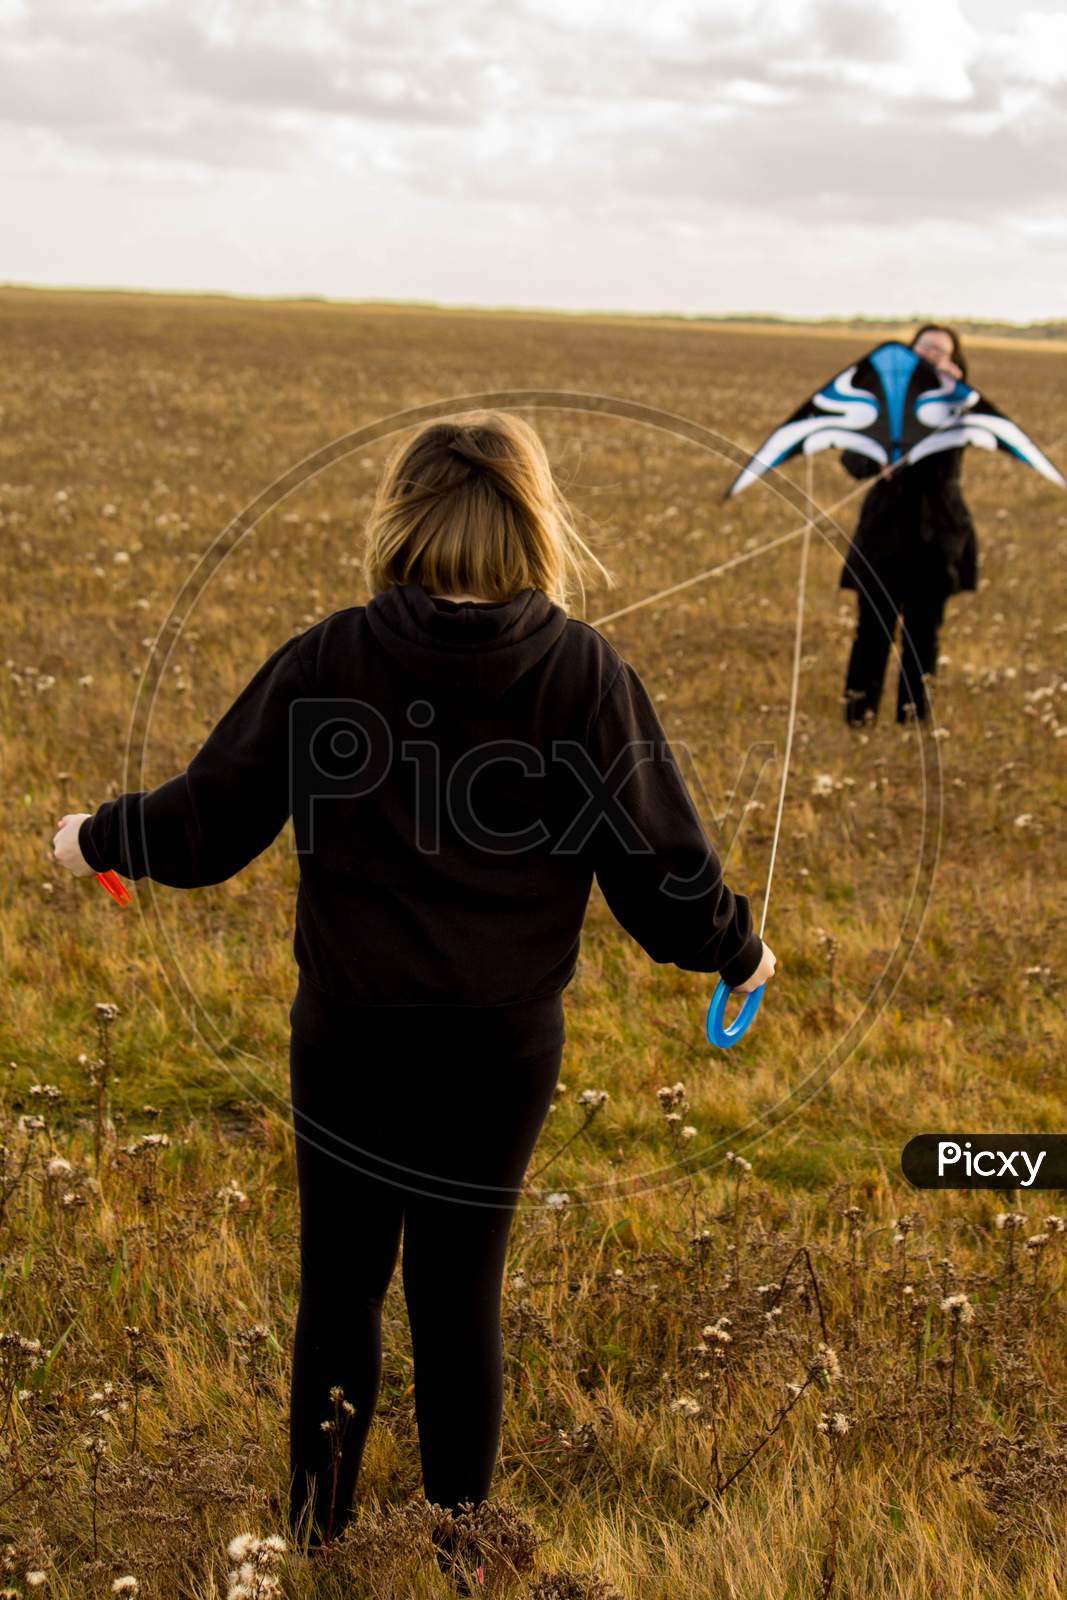 Let's All Fly A Kite